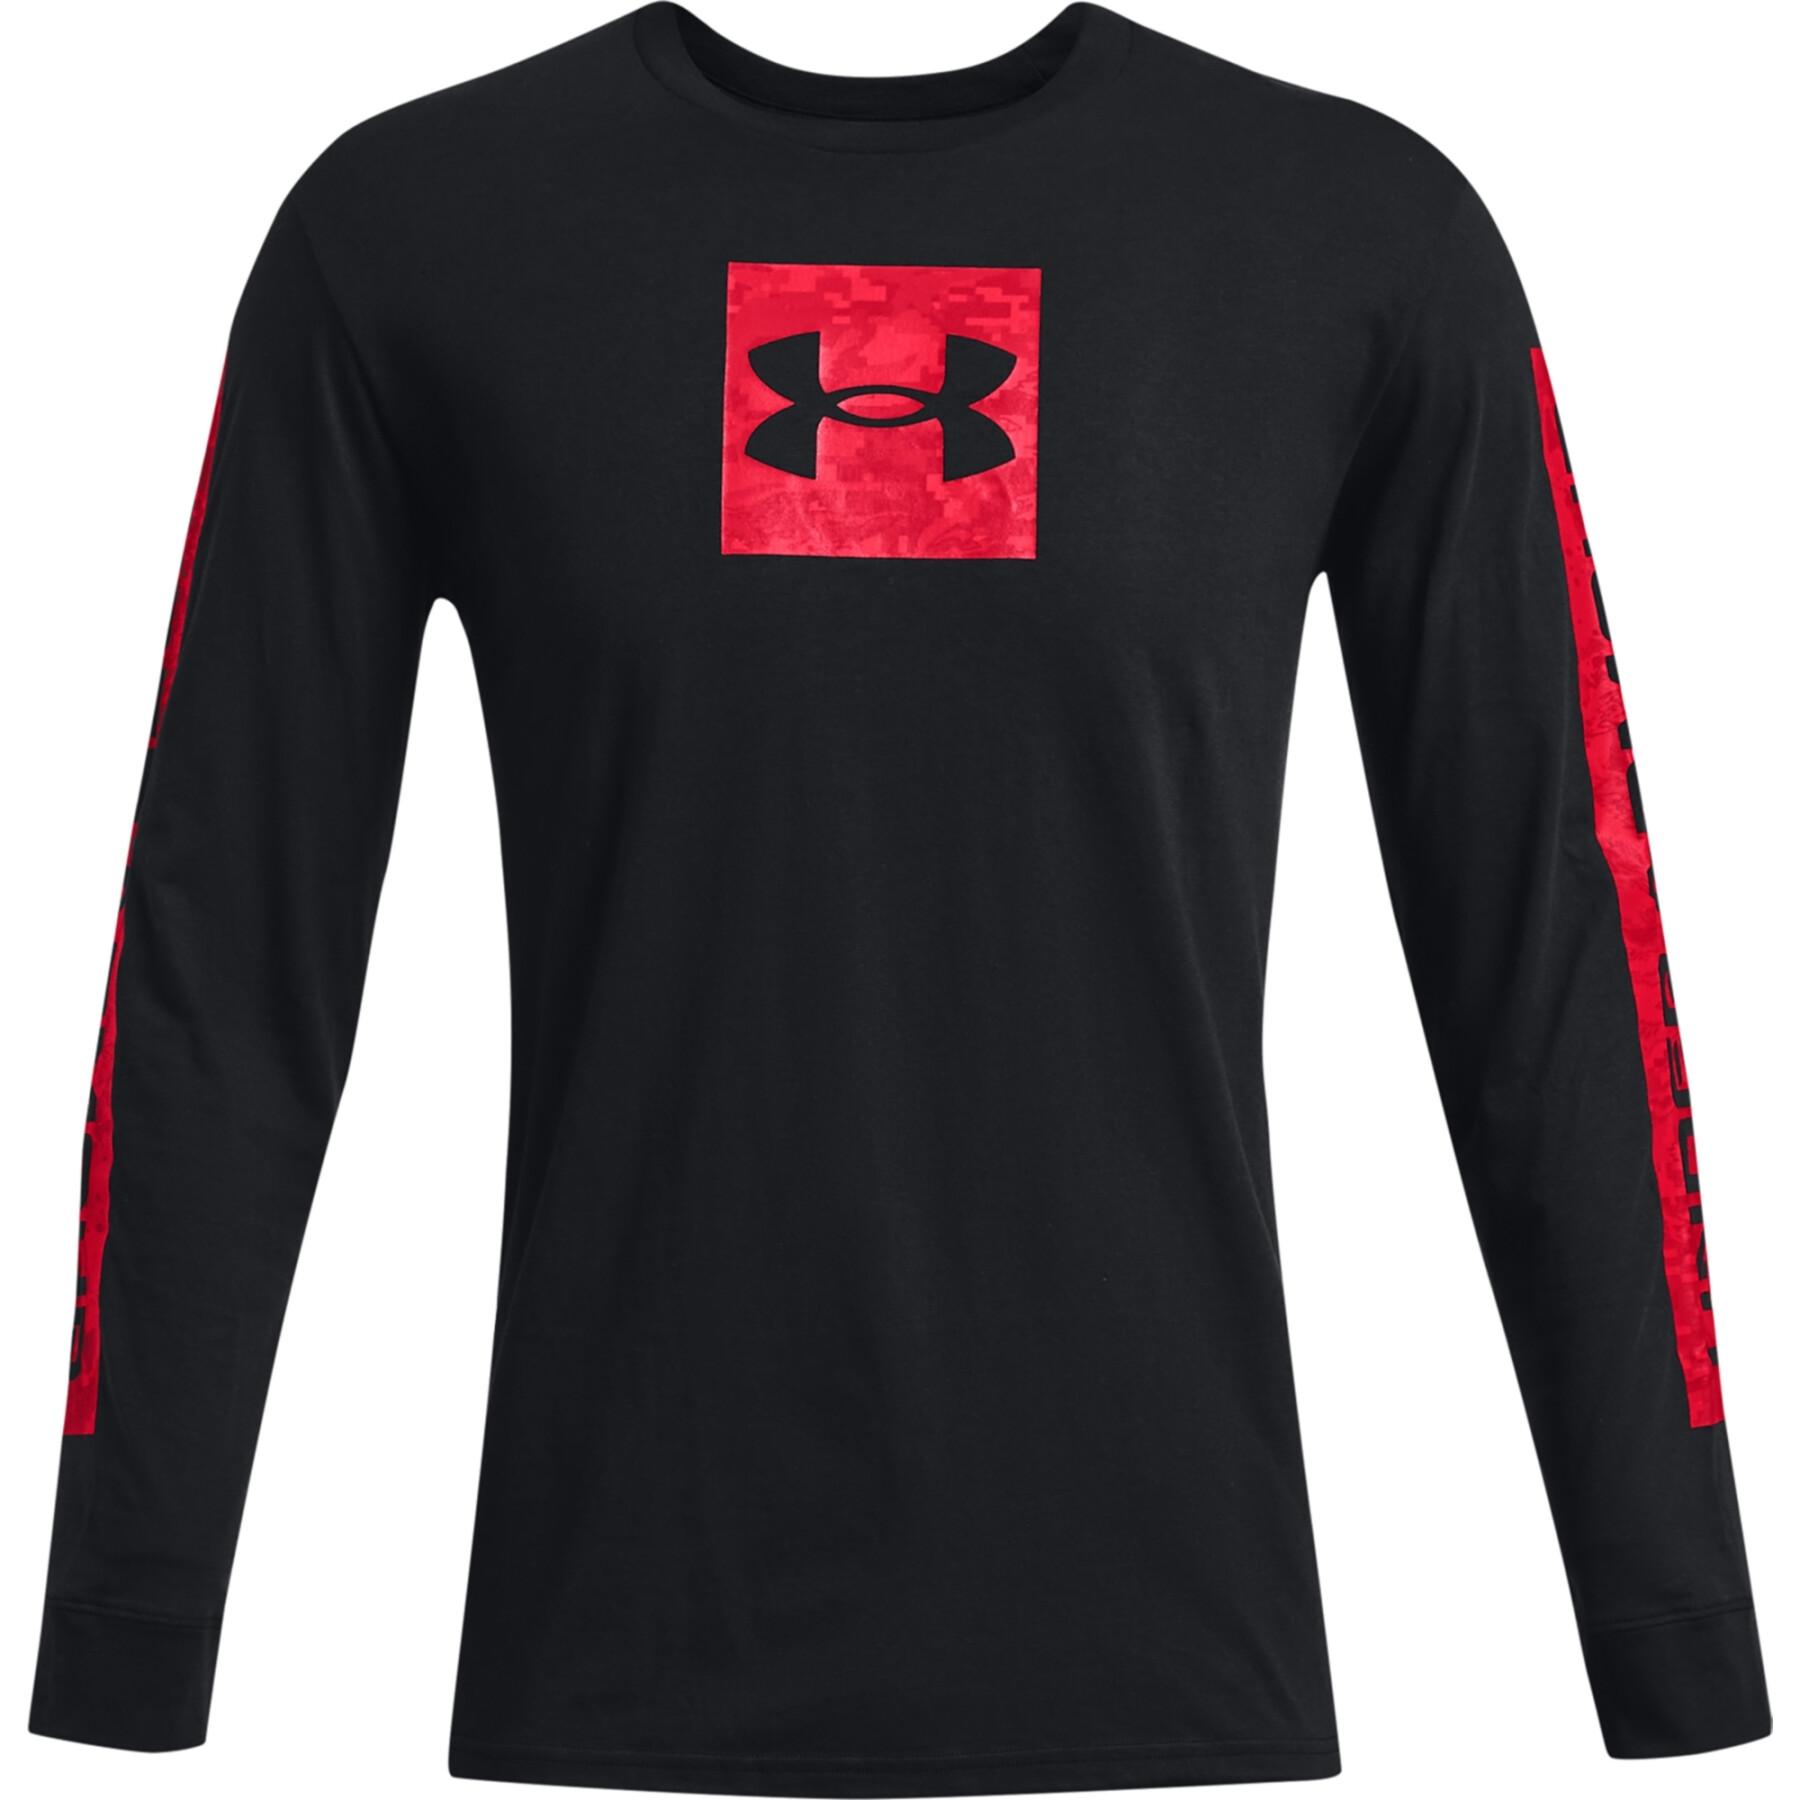 Langarm-T-Shirt Under Armour Camo Boxed Sportstyle